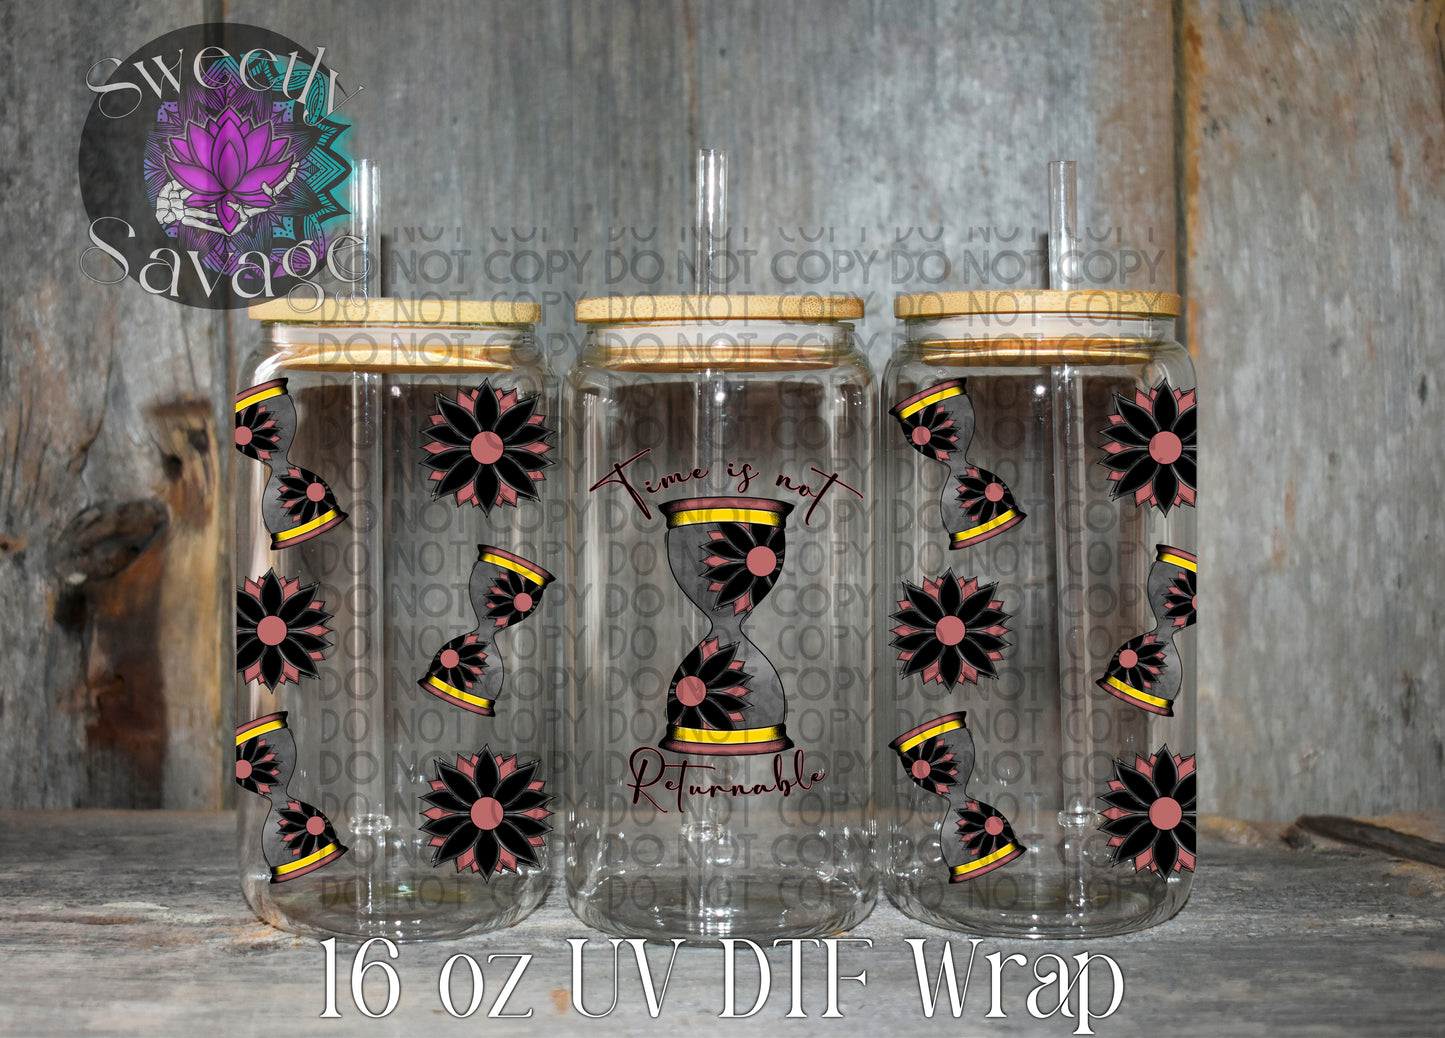 Time is not Returnable 16oz tumbler wrap